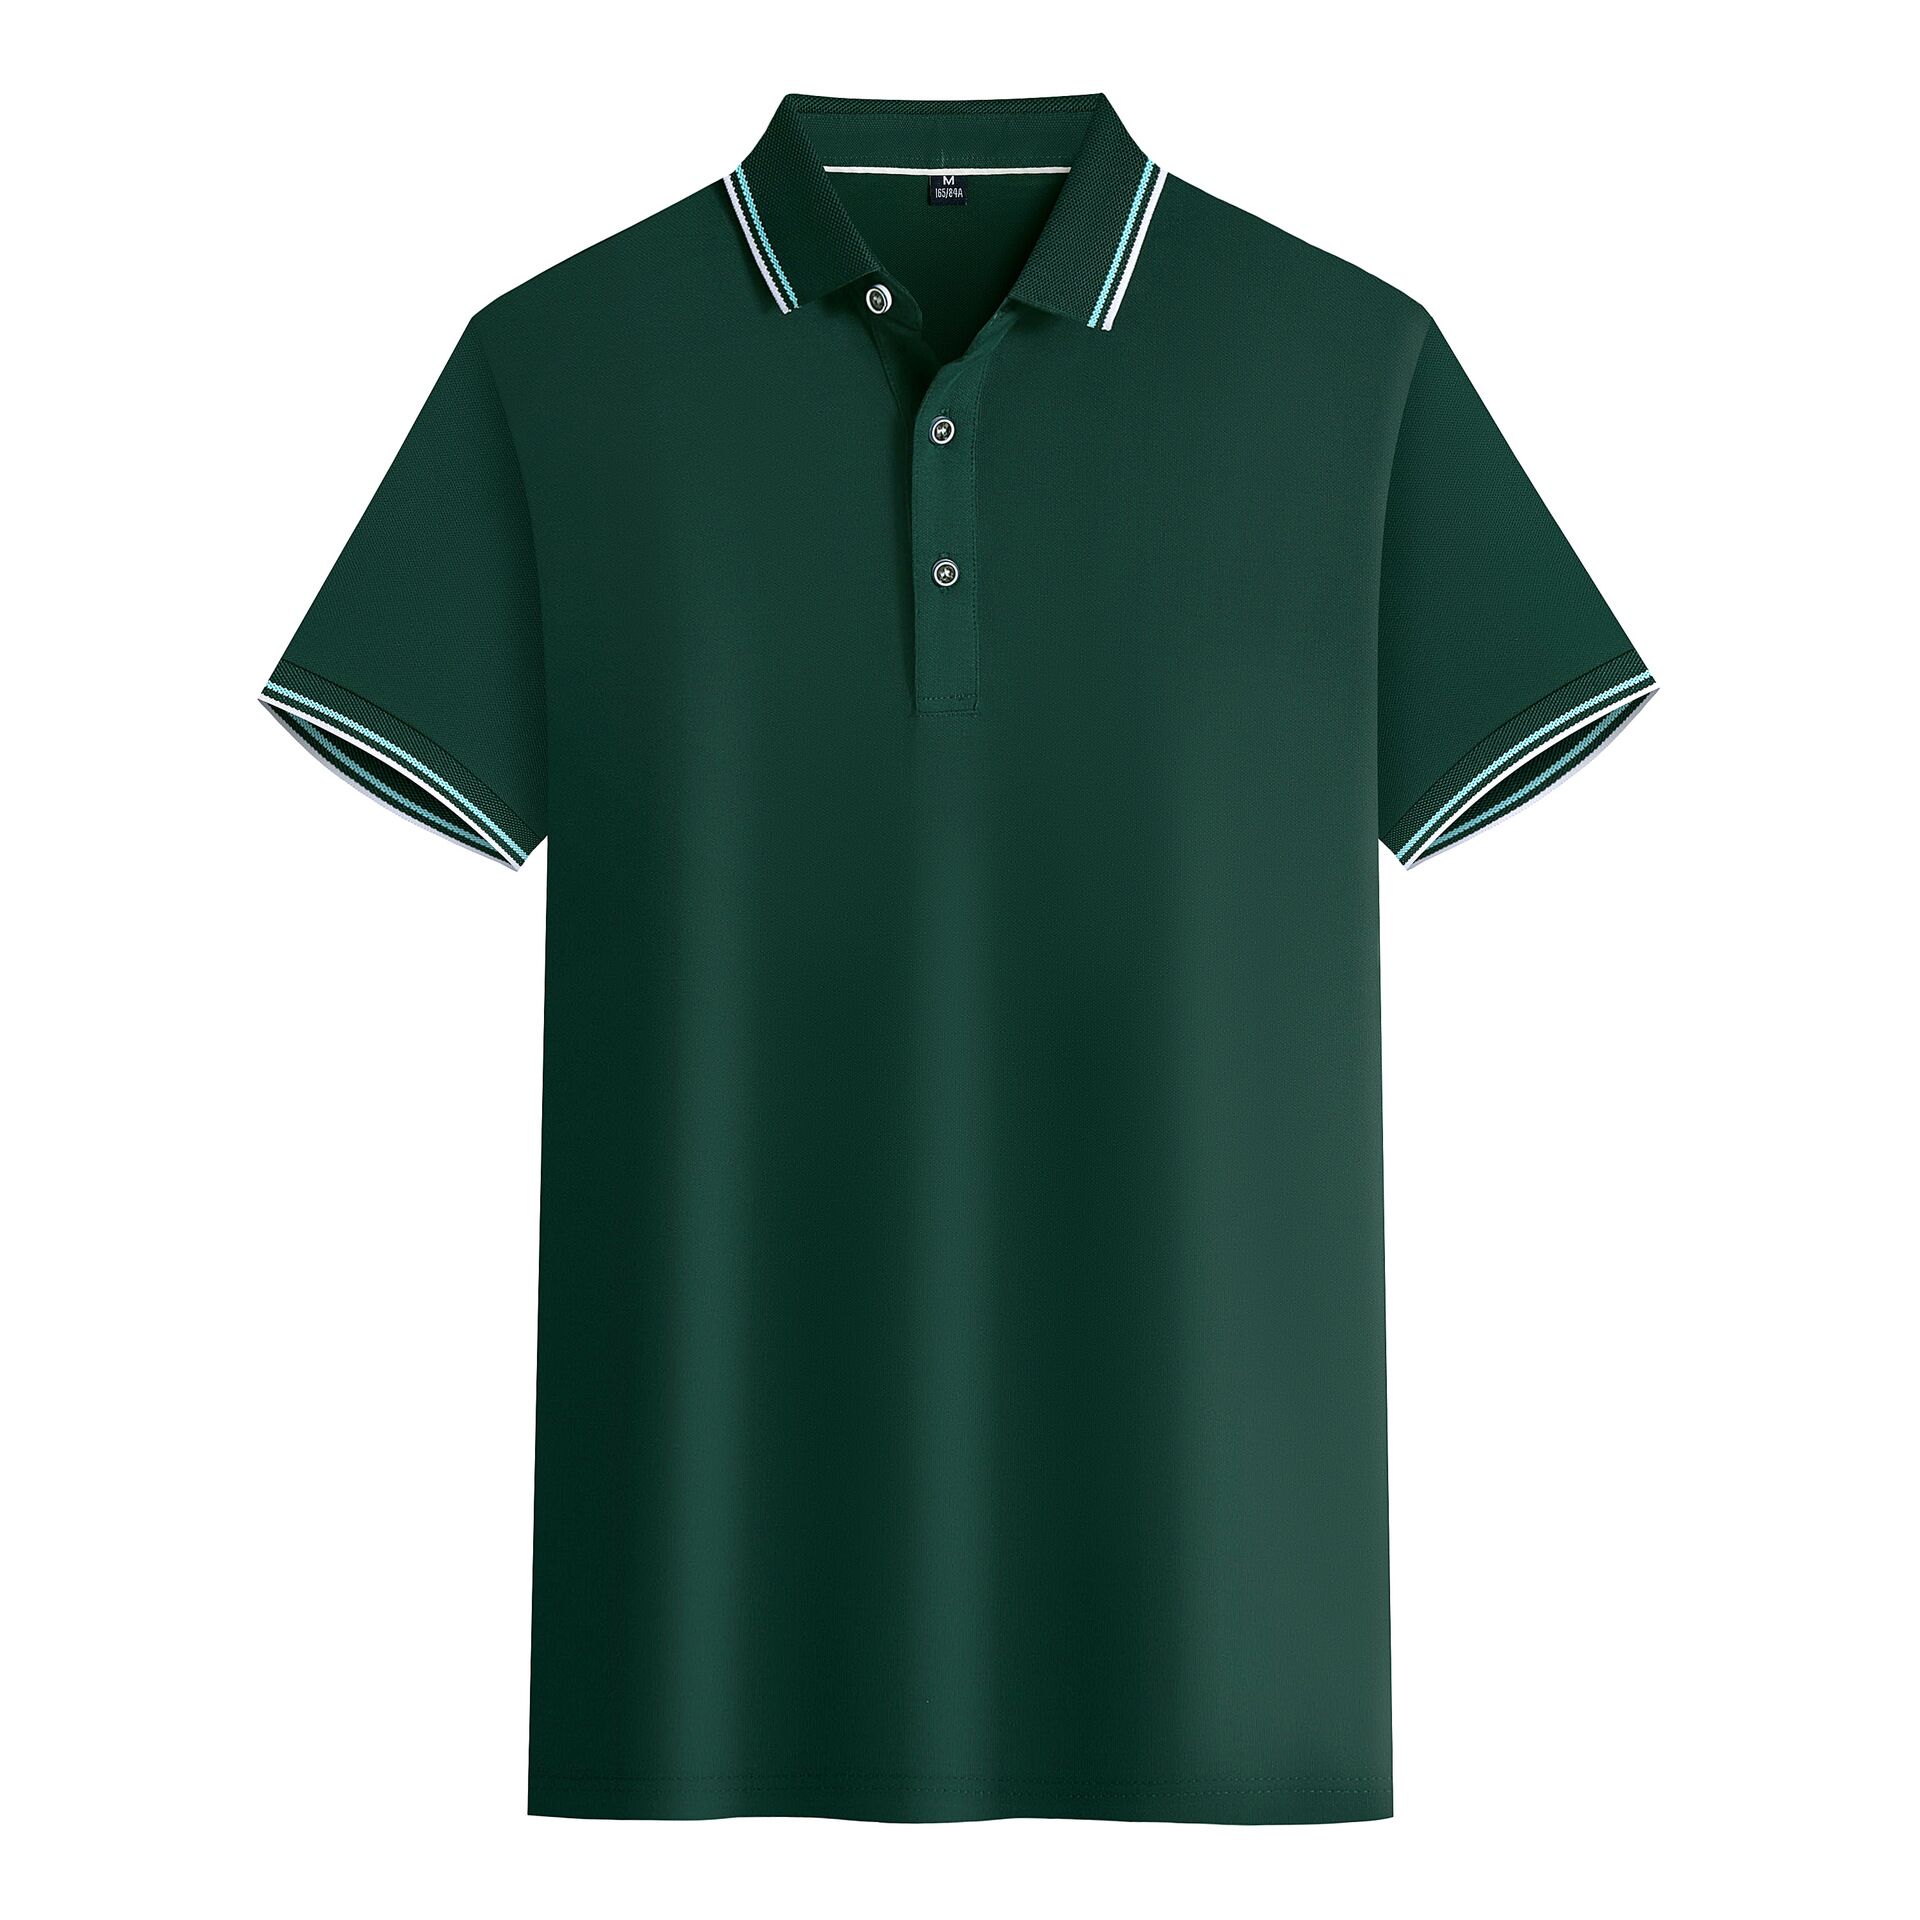 Polo Shirts Manufacturing - My Blog